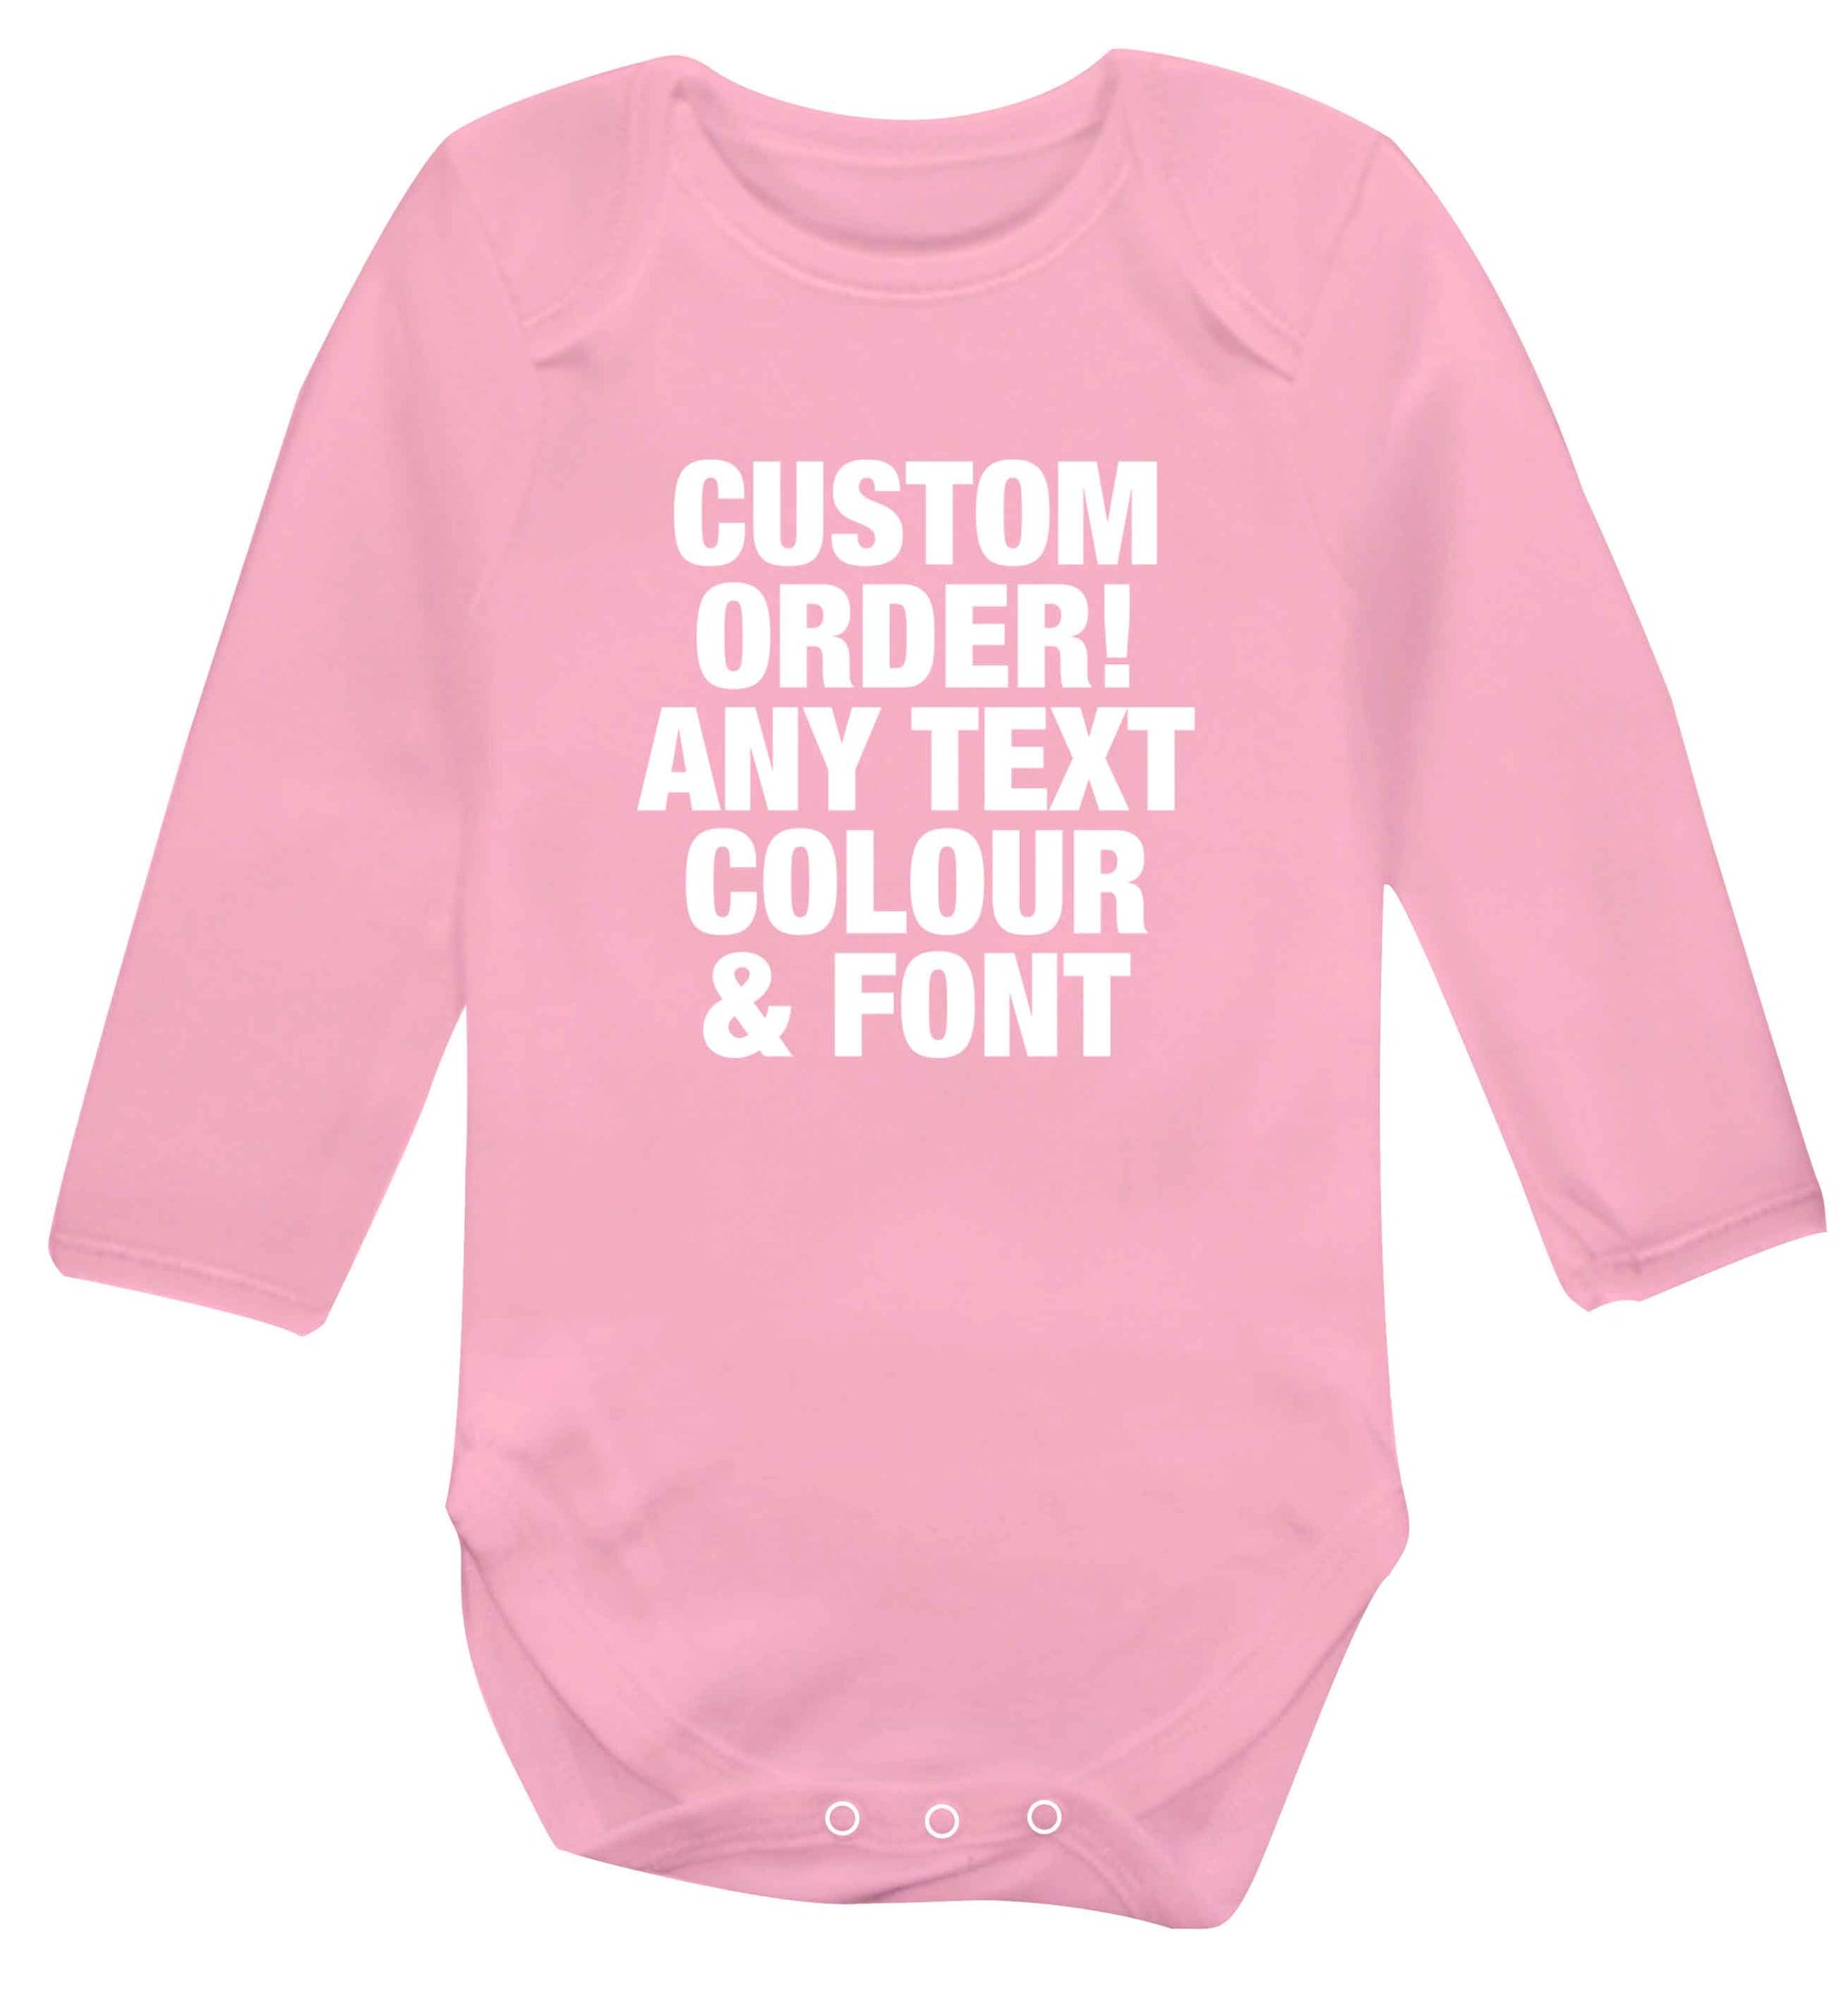 Custom order any text colour and font baby vest long sleeved pale pink 6-12 months